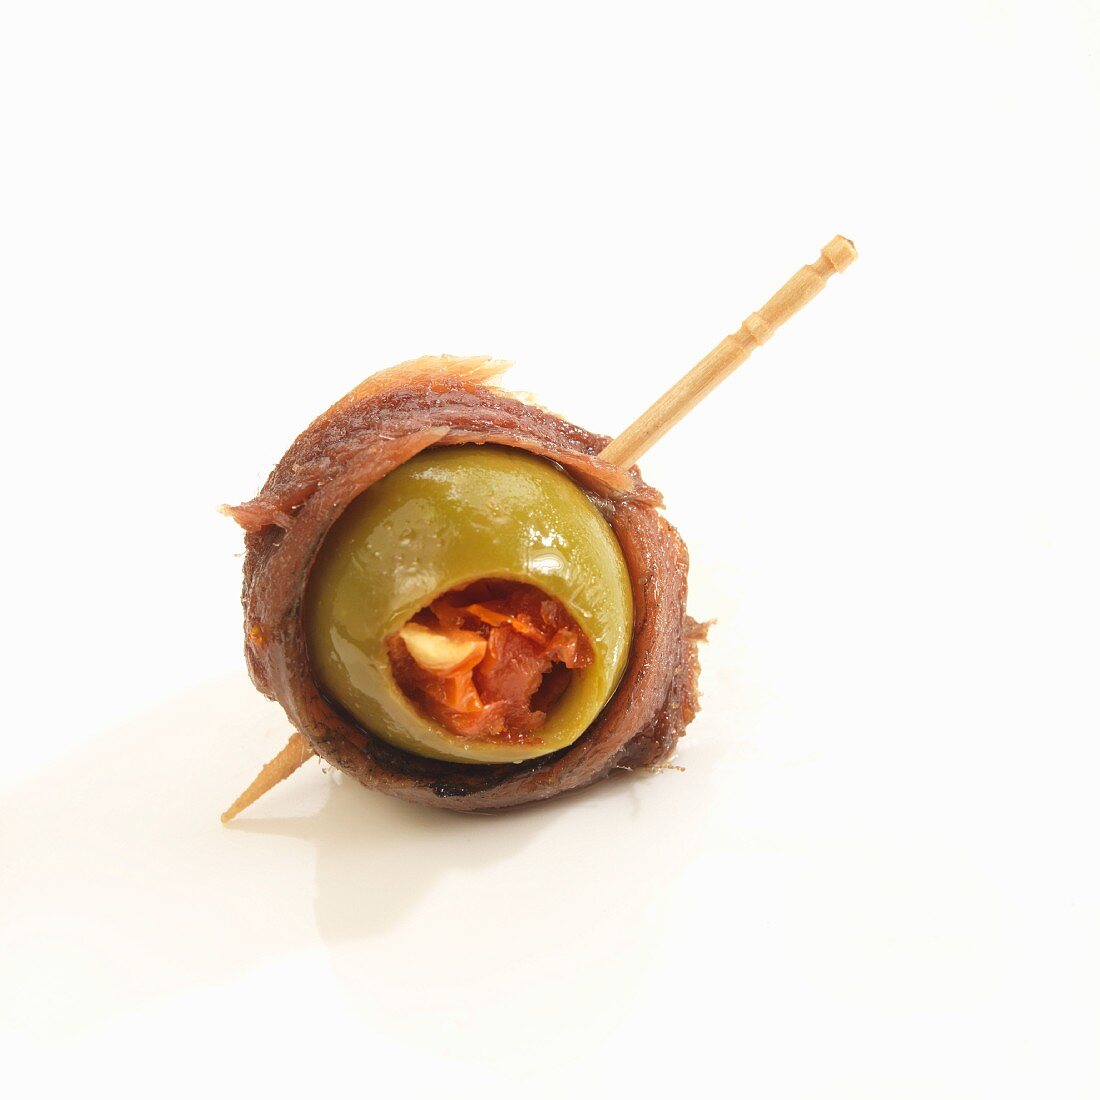 Stuffed Olive Wrapped in Anchovy with a Toothpick